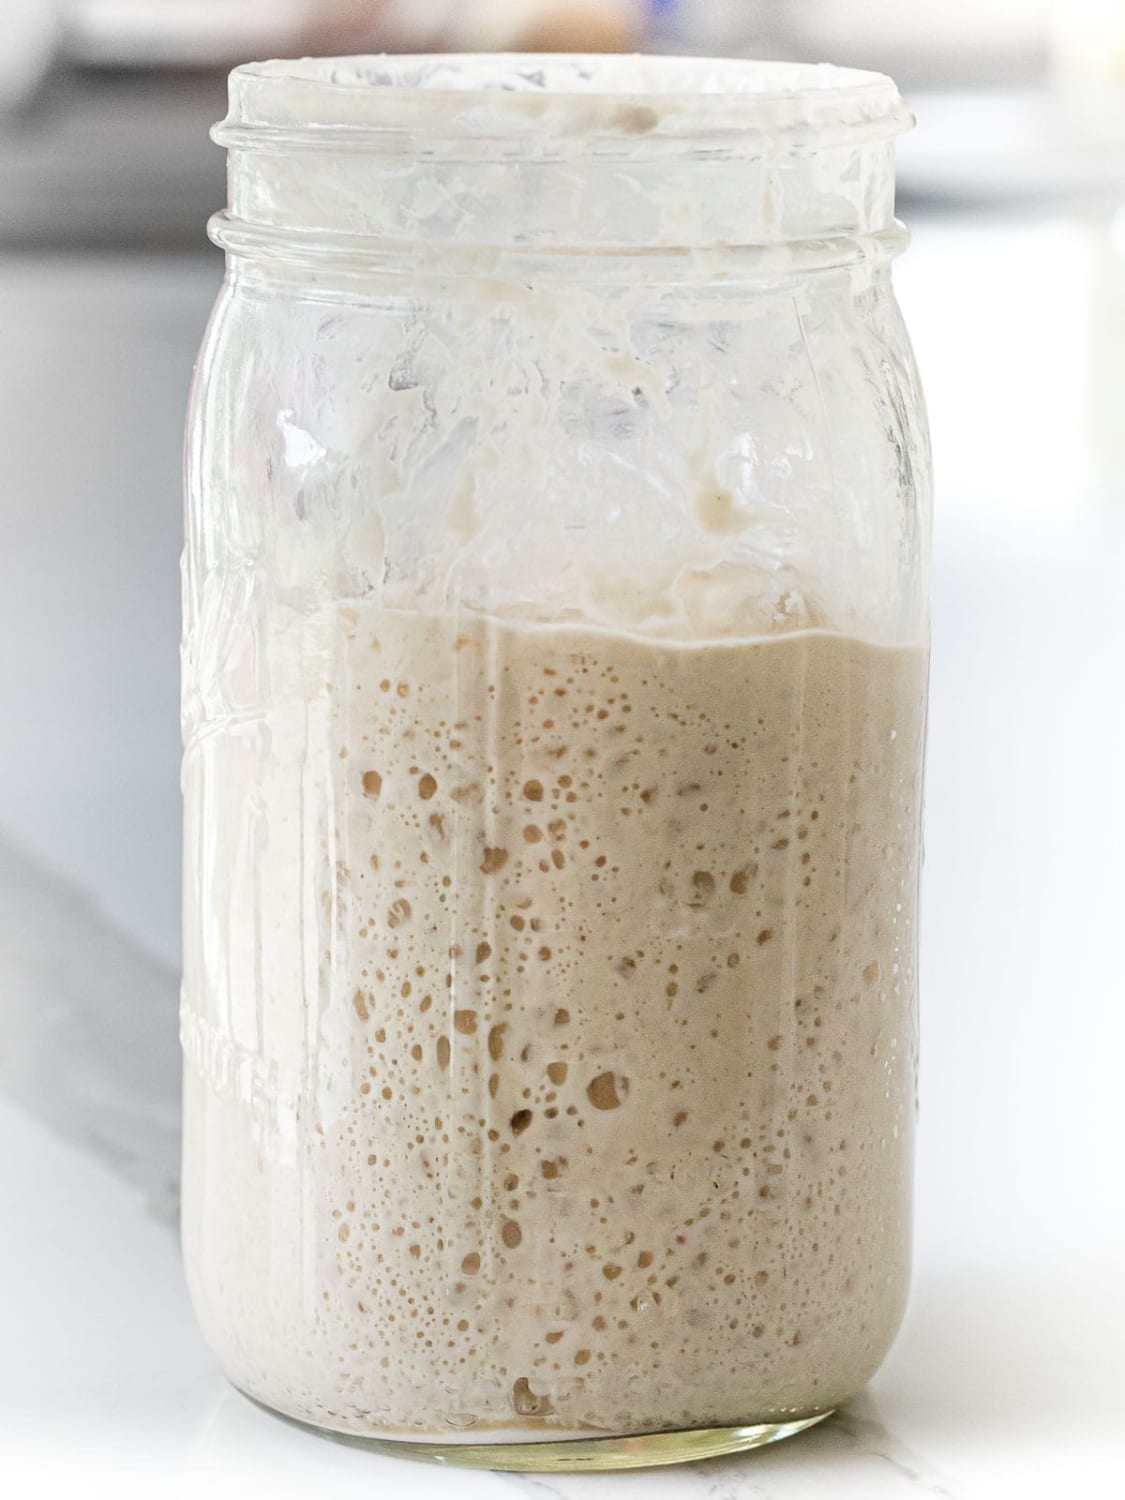 Sourdough Starter 2 Ways - Traditional and No-discard method